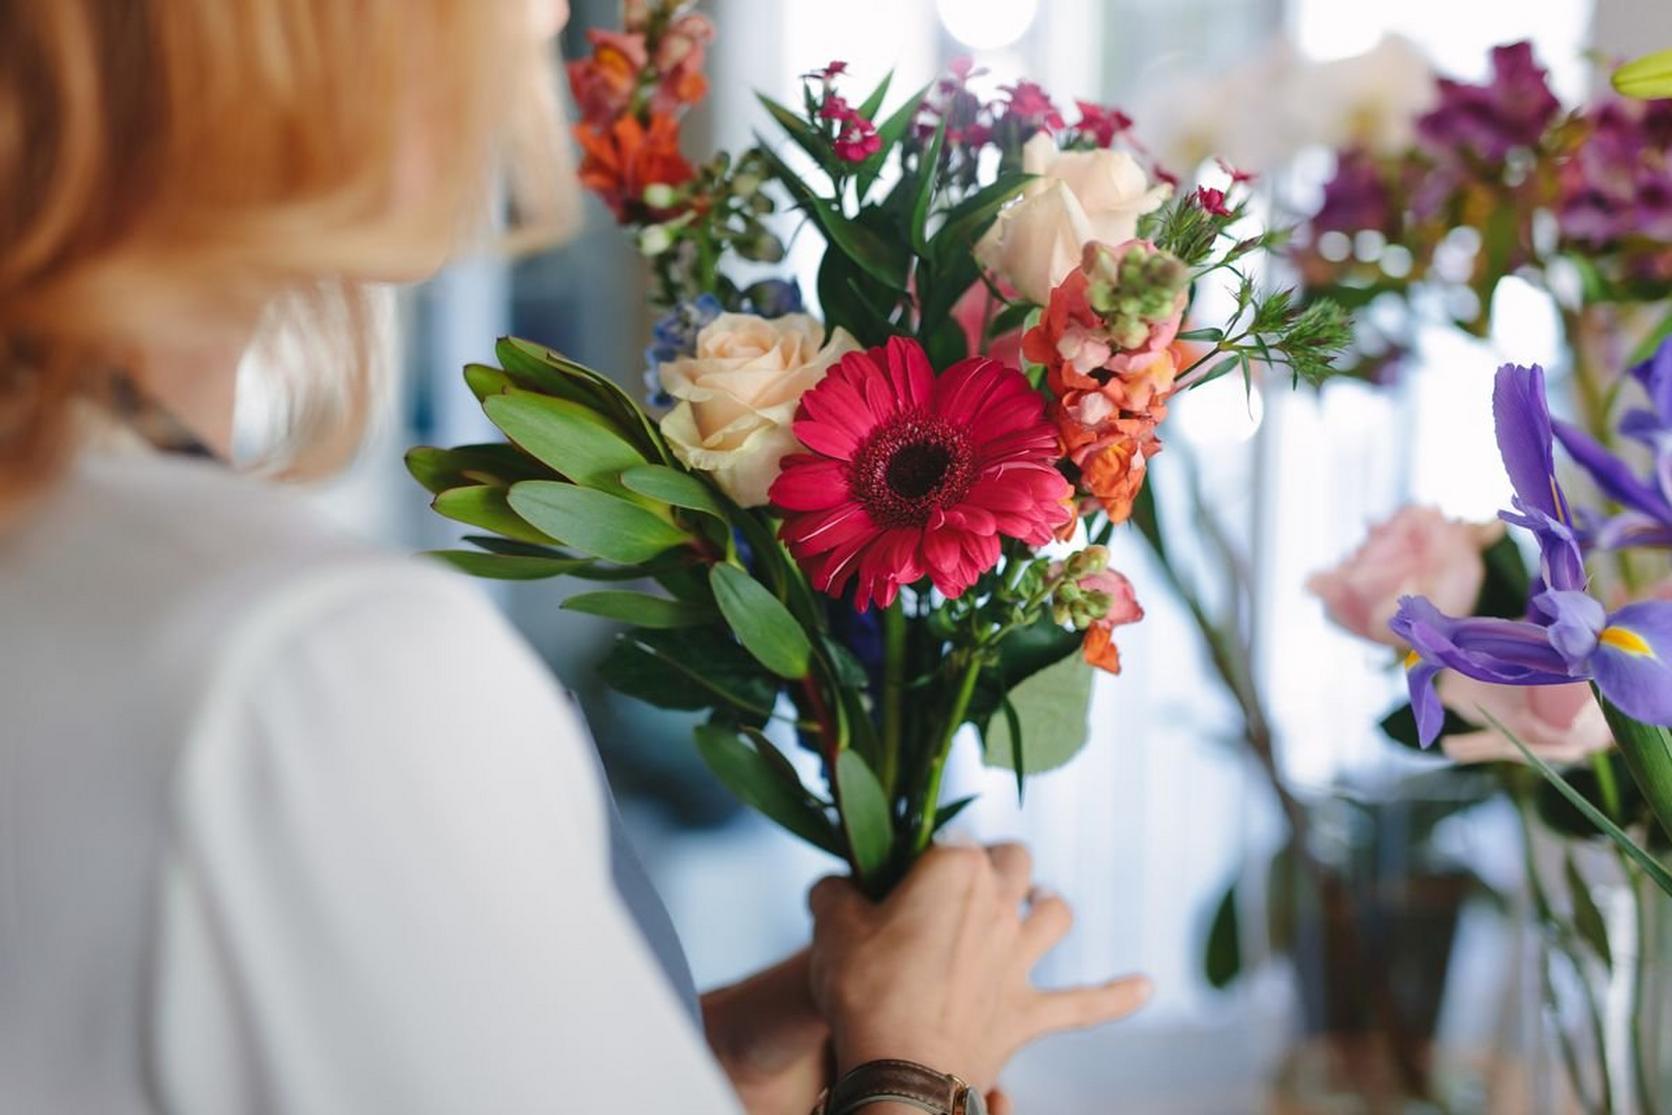 Flower Gifting: Different Types of Flowers To Say Thank You